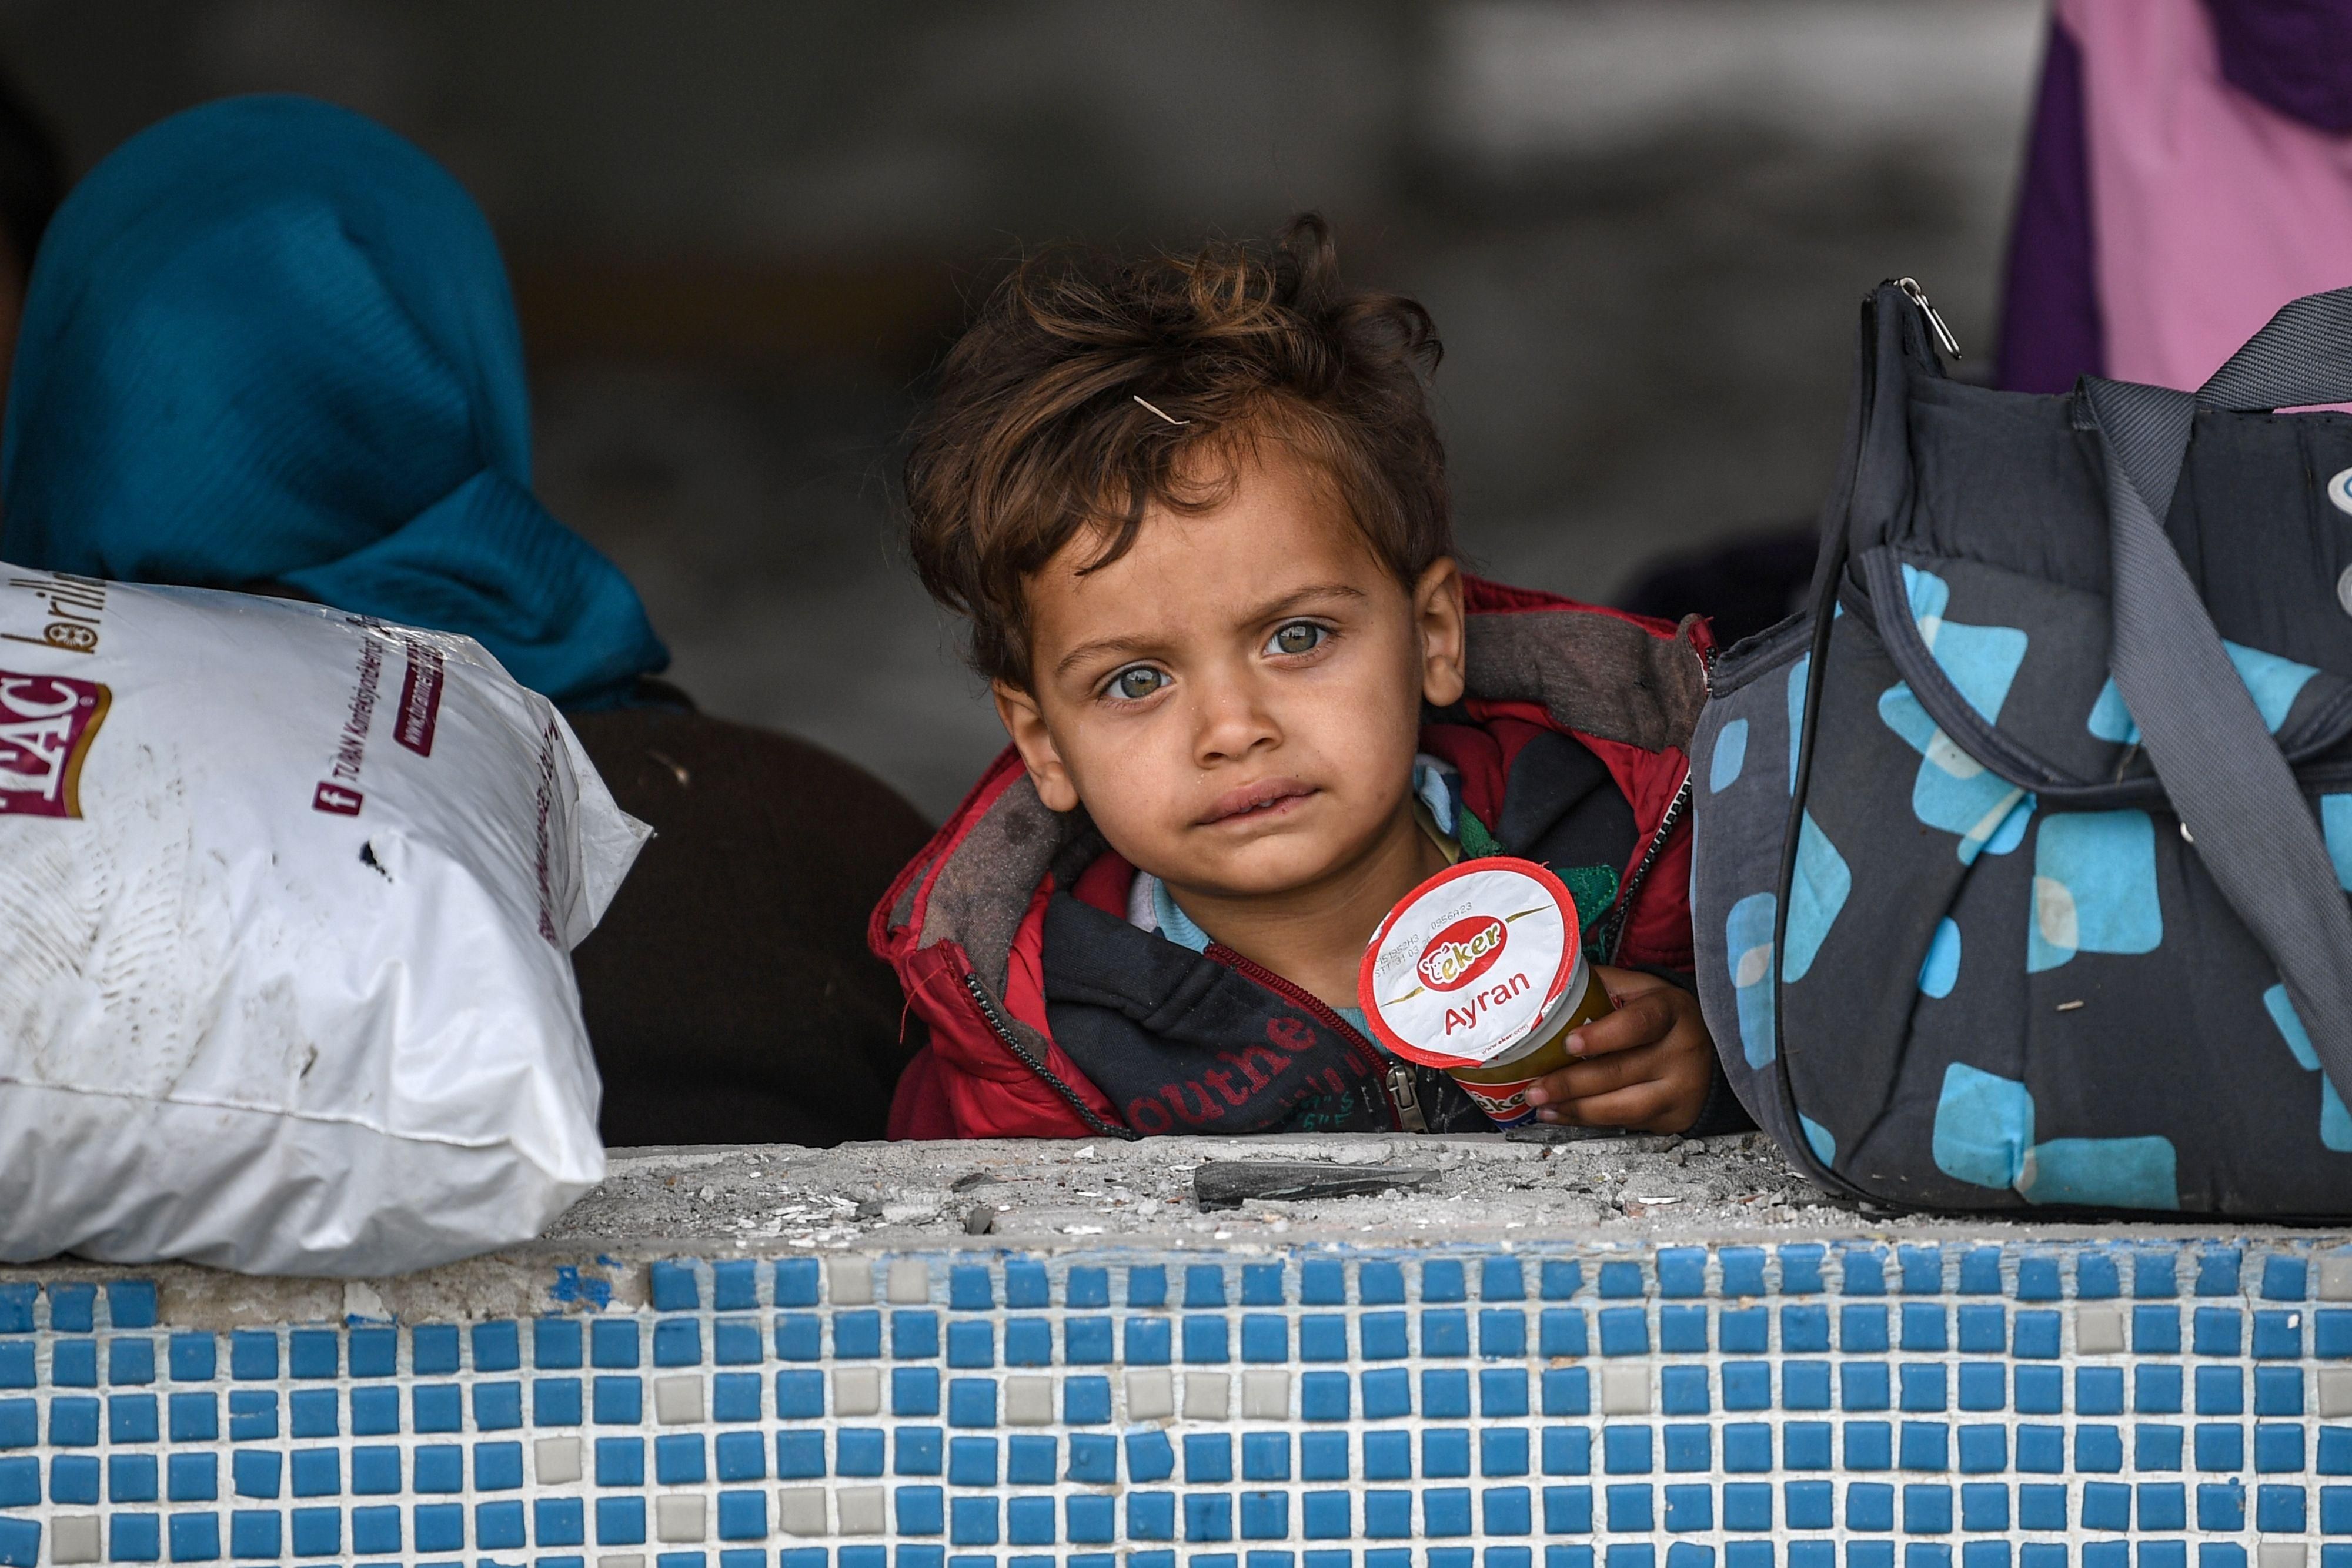 A child looks on as migrants take shelter inside a abandoned building as they gather in city center waiting to resume their efforts to enter Europe in Edirne, northwestern Turkey on March 5, 2020. The EU has scrambled to respond to the surge of migrants at the Greek border, where authorities say some 24,000 were stopped from entering between February 29 - March 2, 2020. (Photo: OZAN KOSE/AFP via Getty Images)